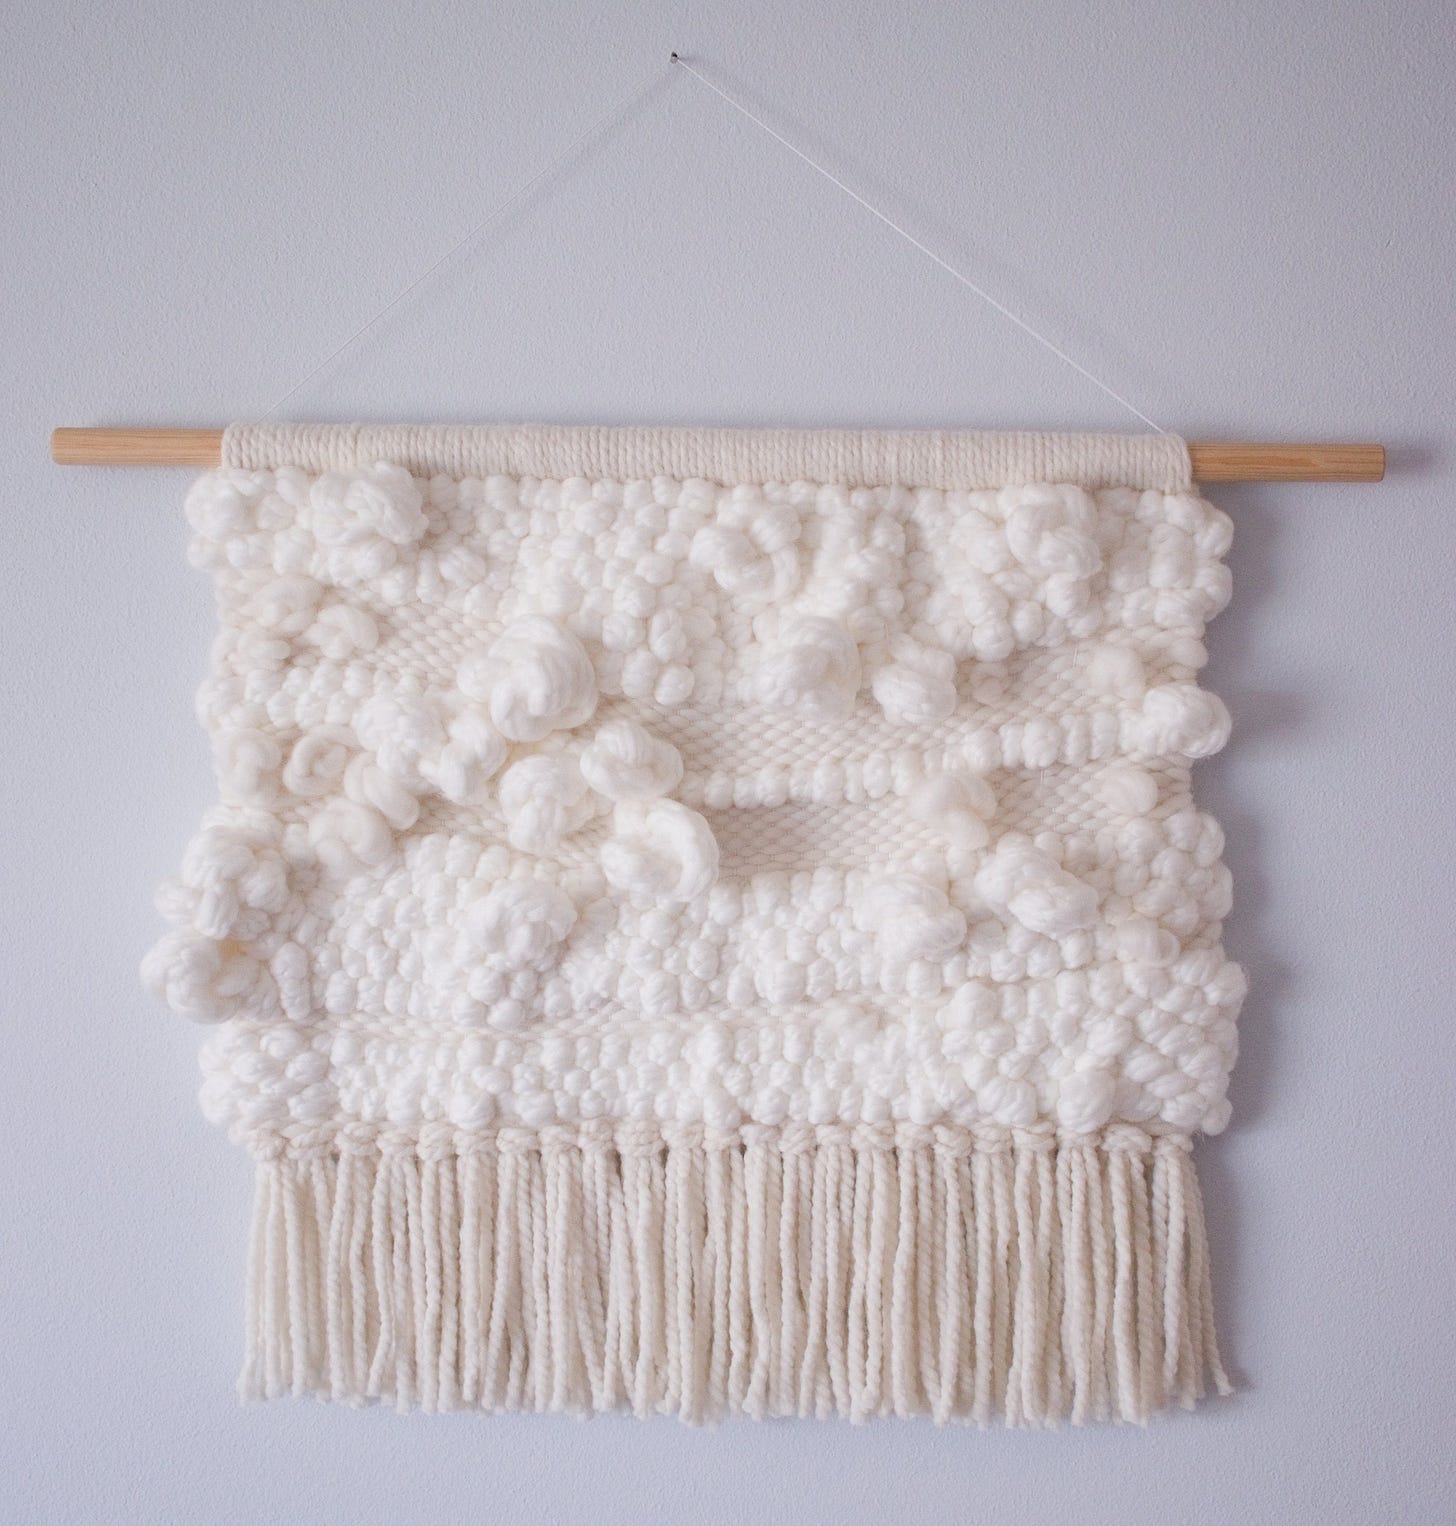 White weaving with big fluffy knots. I made this in 2021.